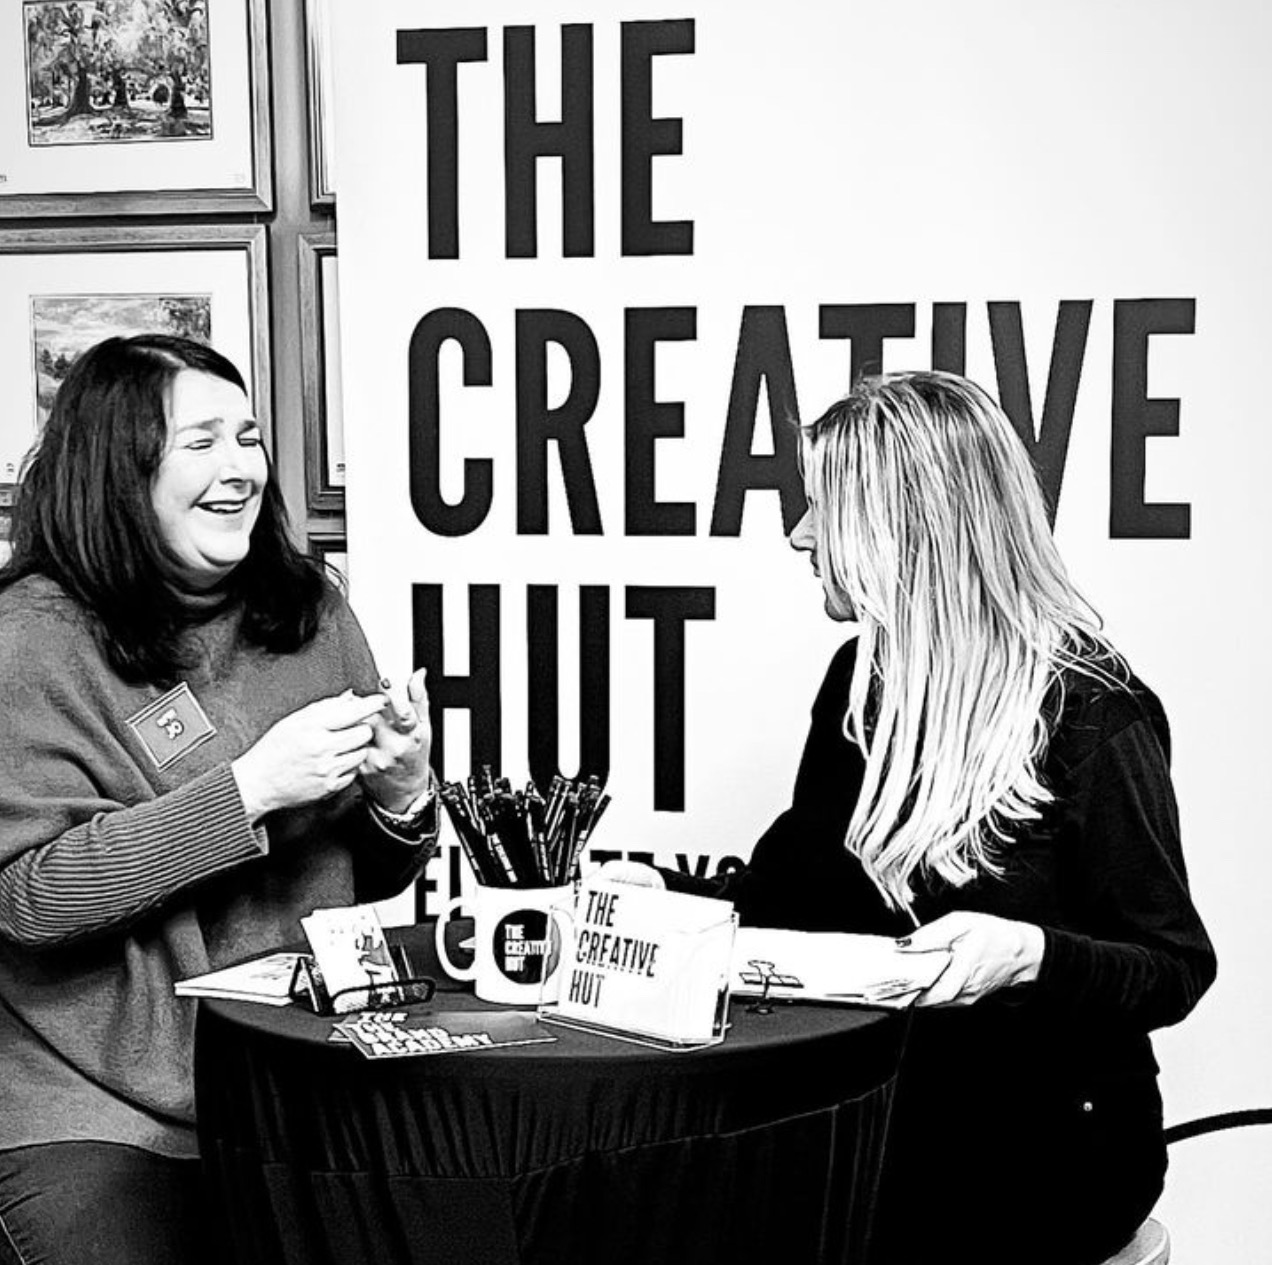 the boss of the creative hut speaking to a client at a works event 